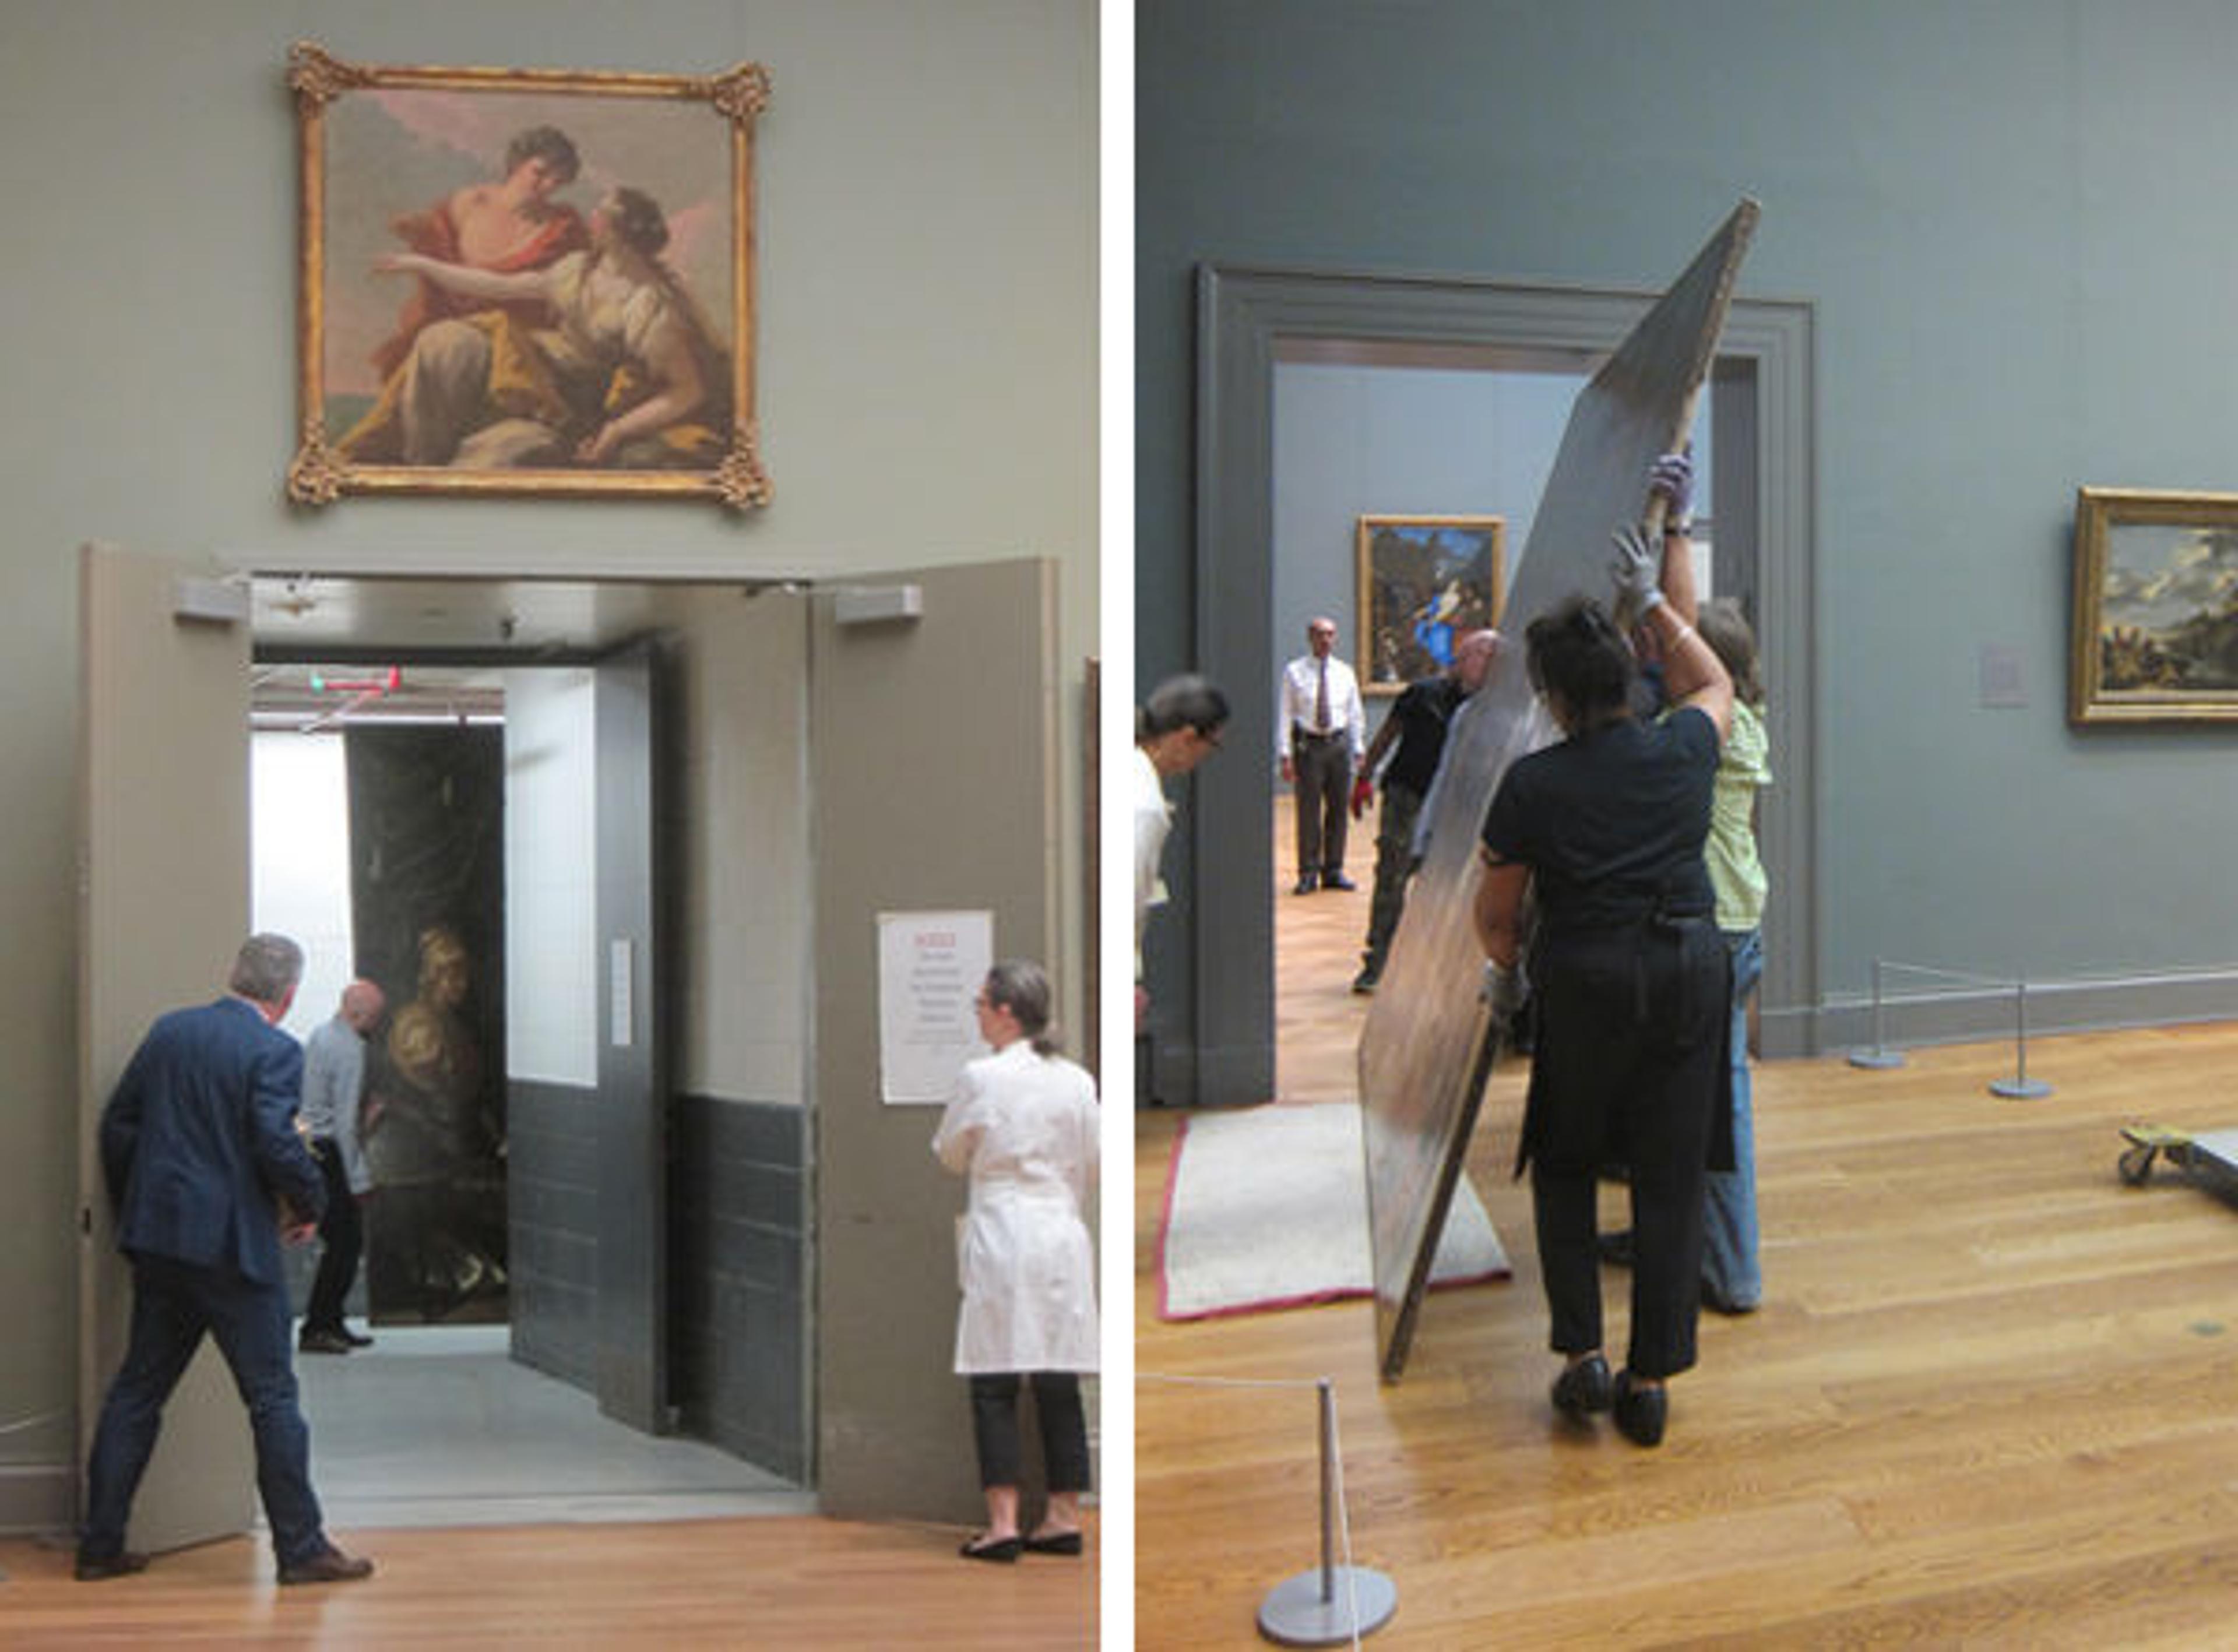 Moving the painting into the gallery